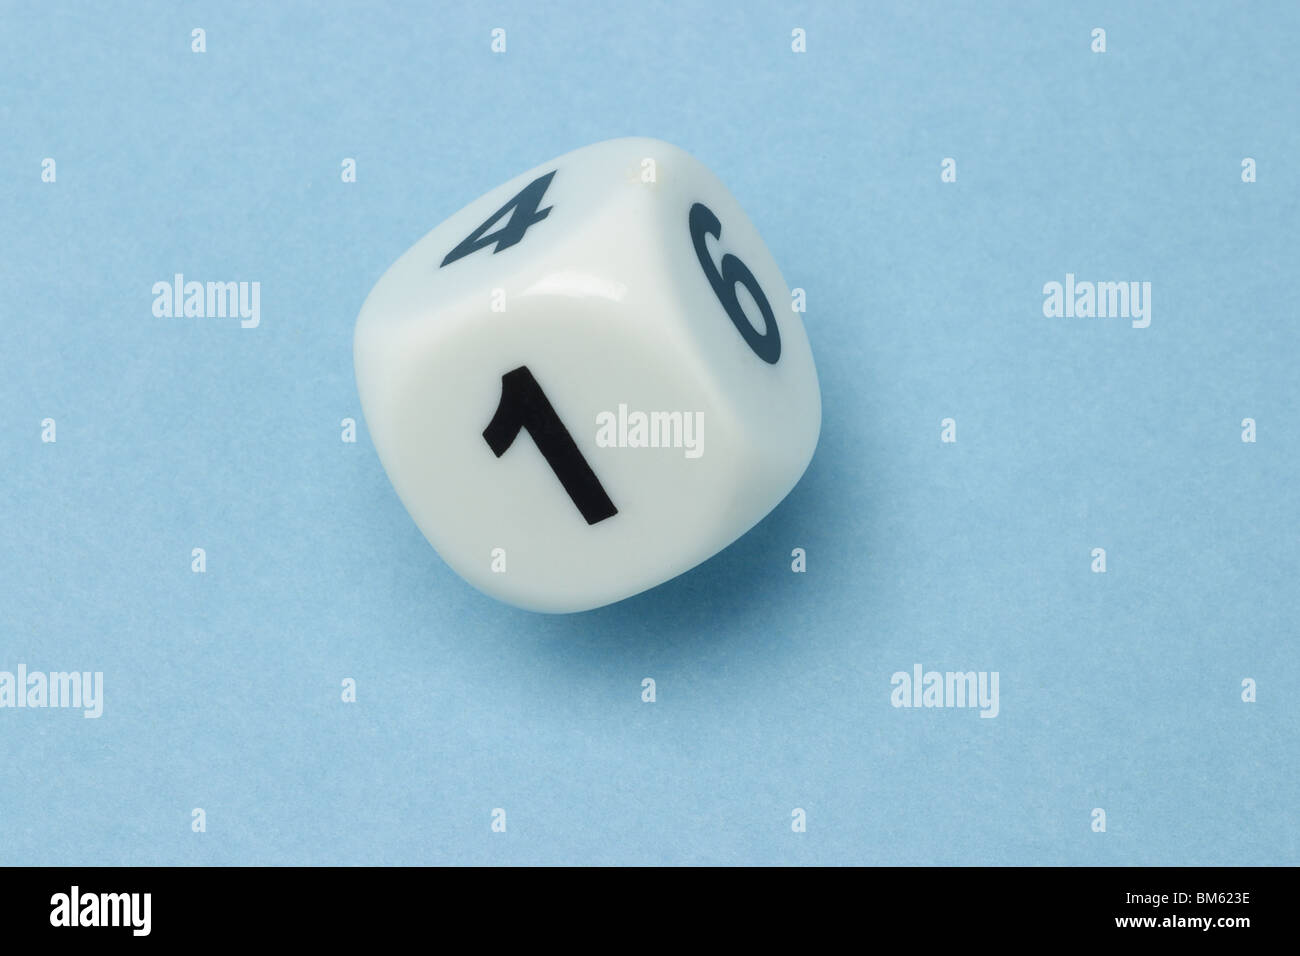 White dice with numbers 1, 4 and 6 on blue background Stock Photo